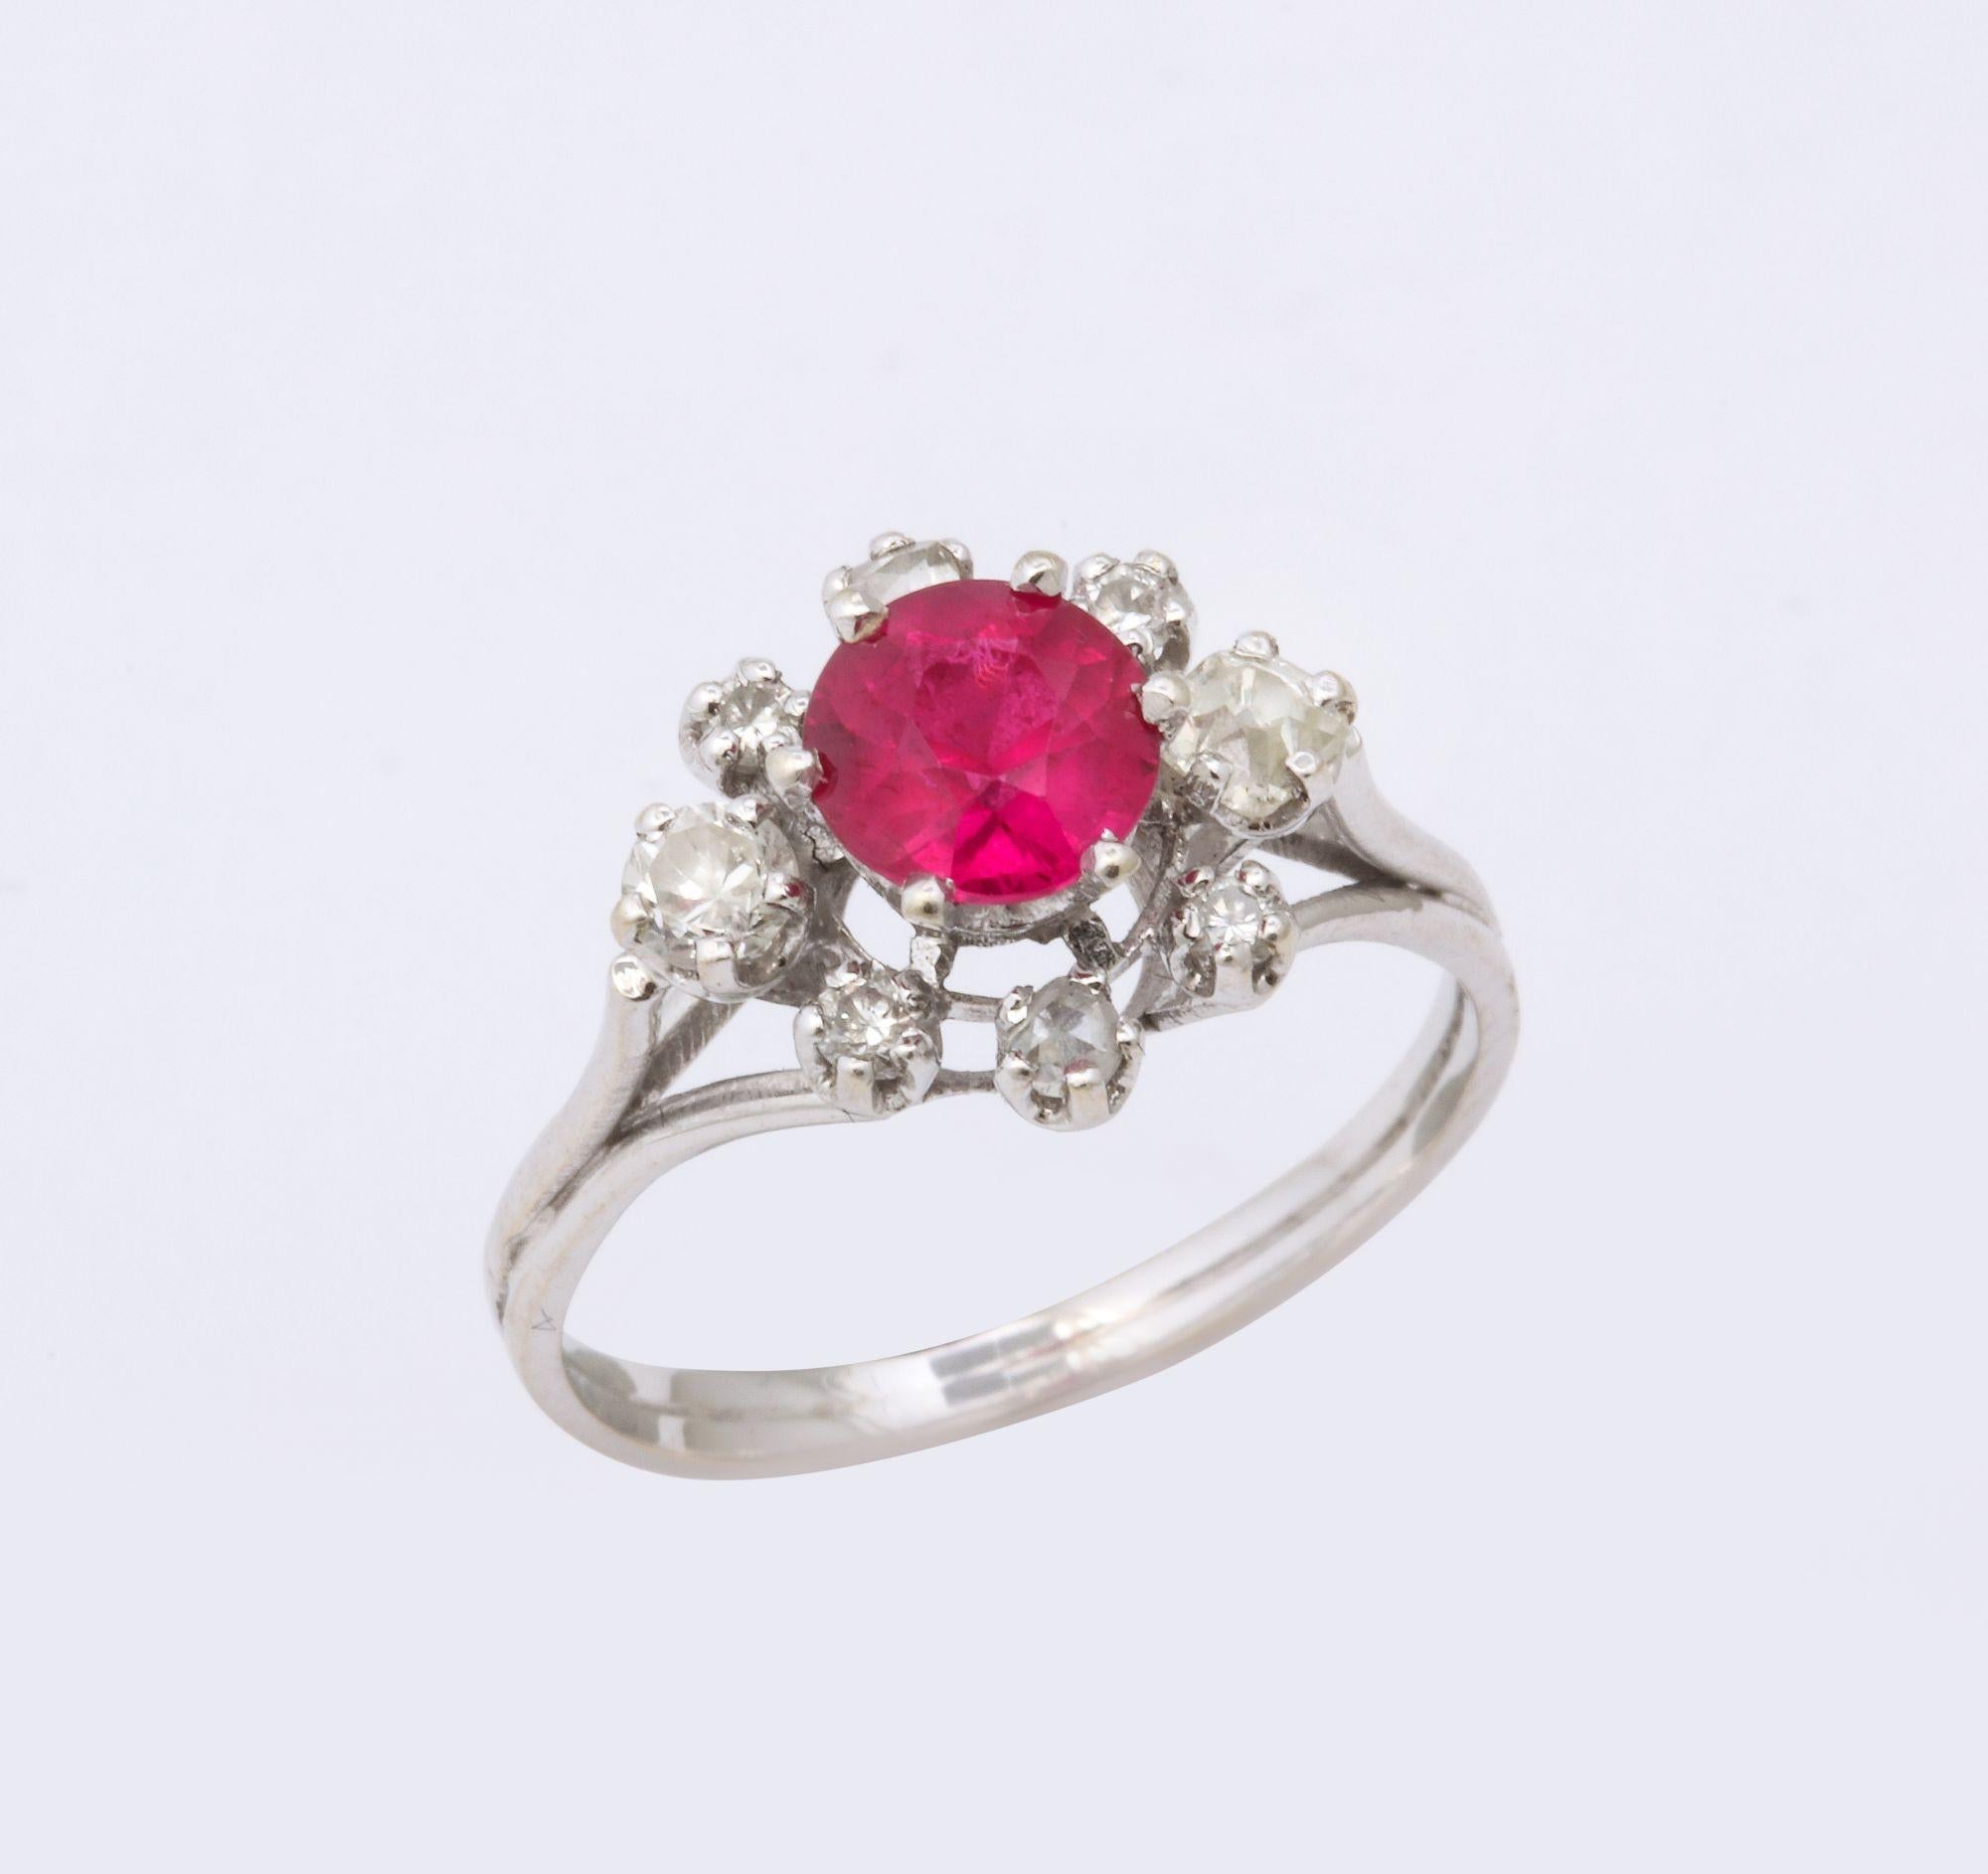 French Ruby (possibly synthetic) and Diamond Platinum Ring. Classic cluster ring with mine cut diamonds.